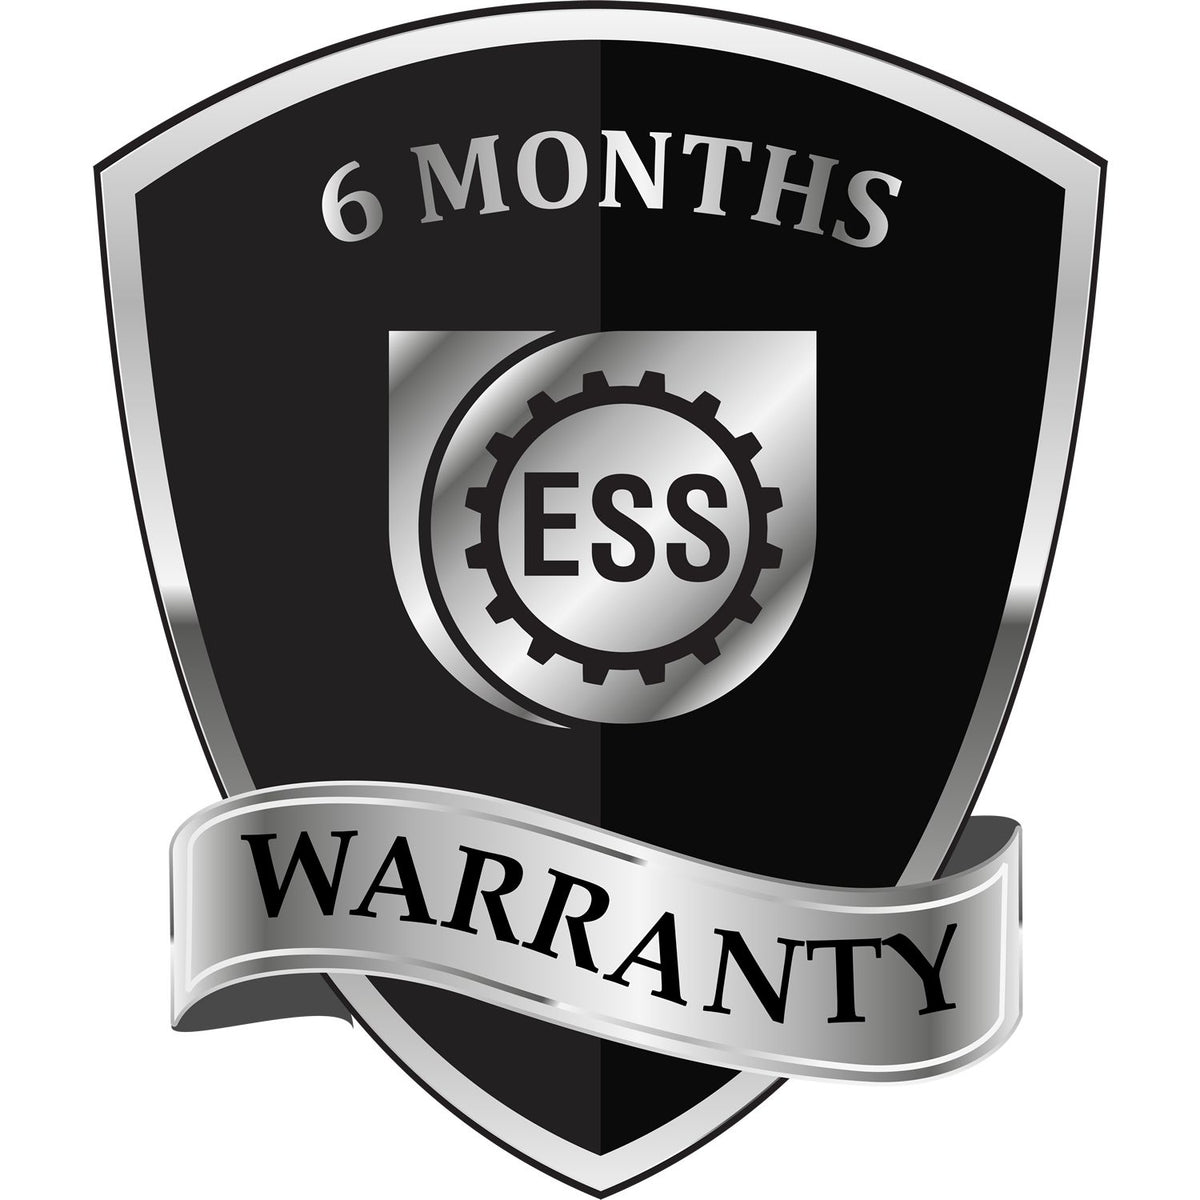 A badge or emblem showing a warranty icon for the Self-Inking New York PE Stamp